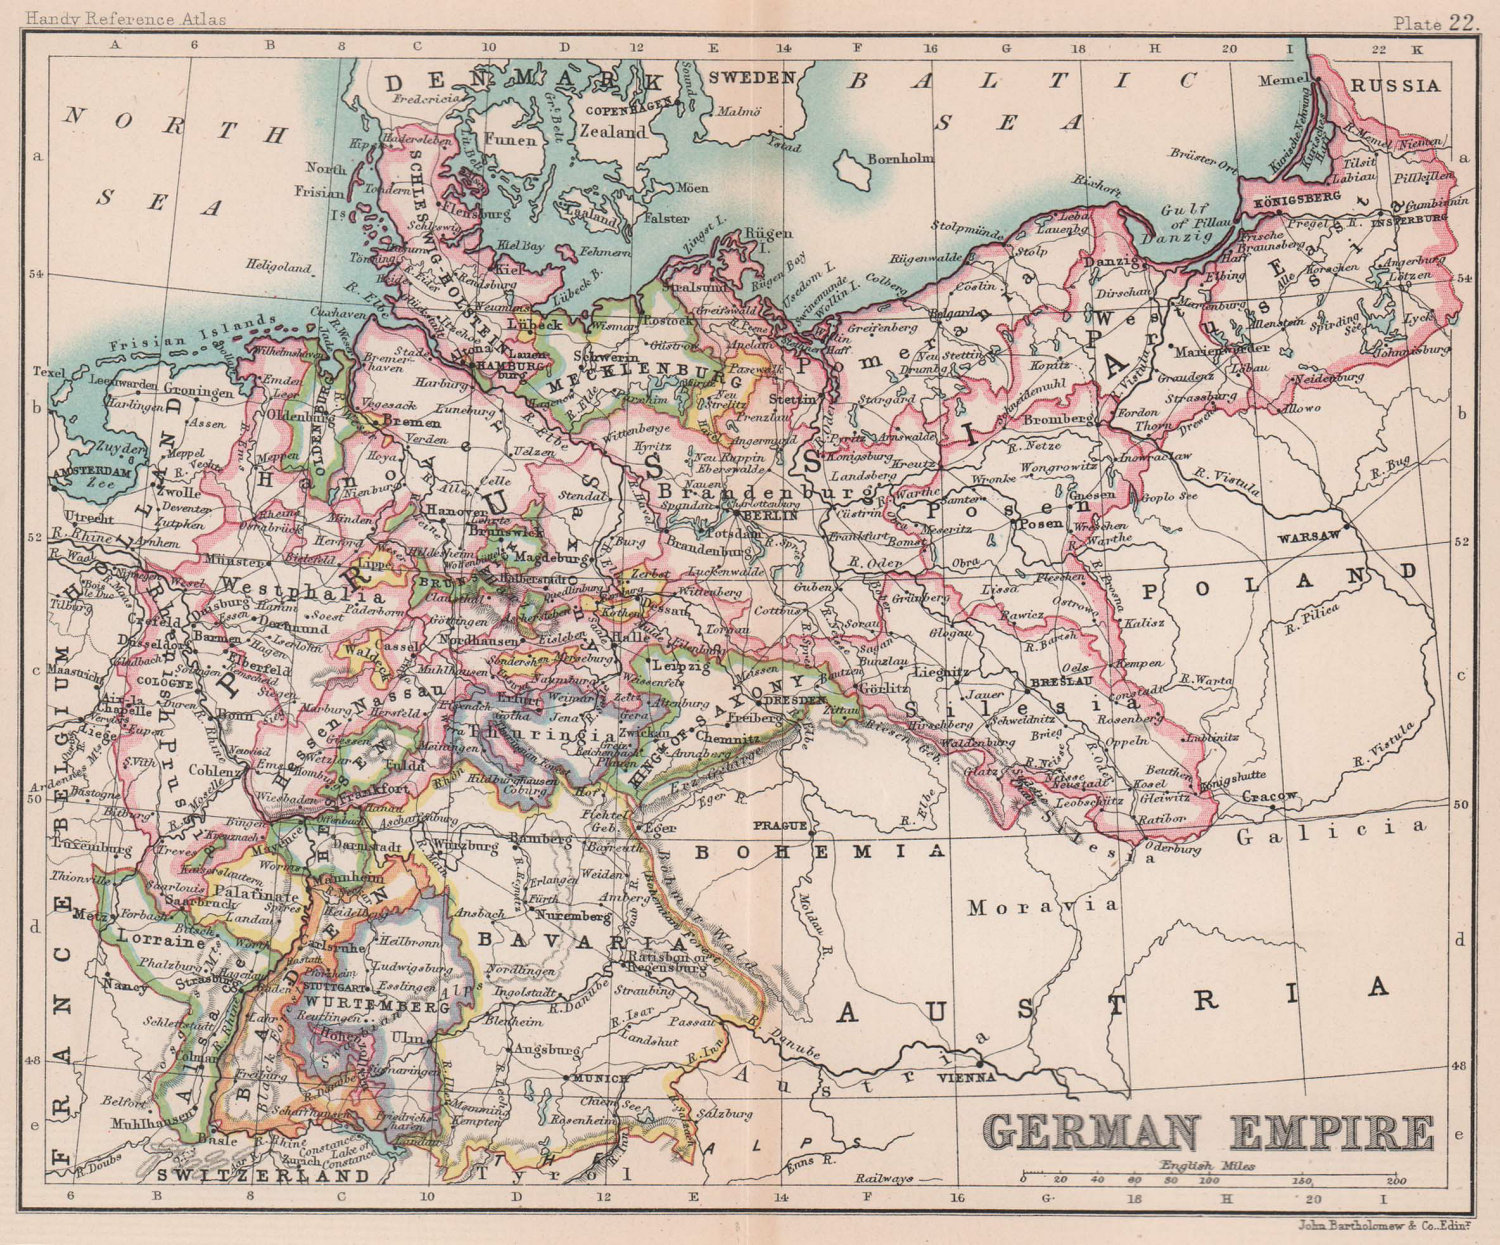 Associate Product German Empire. Germany Prussia Poland. BARTHOLOMEW 1888 old antique map chart